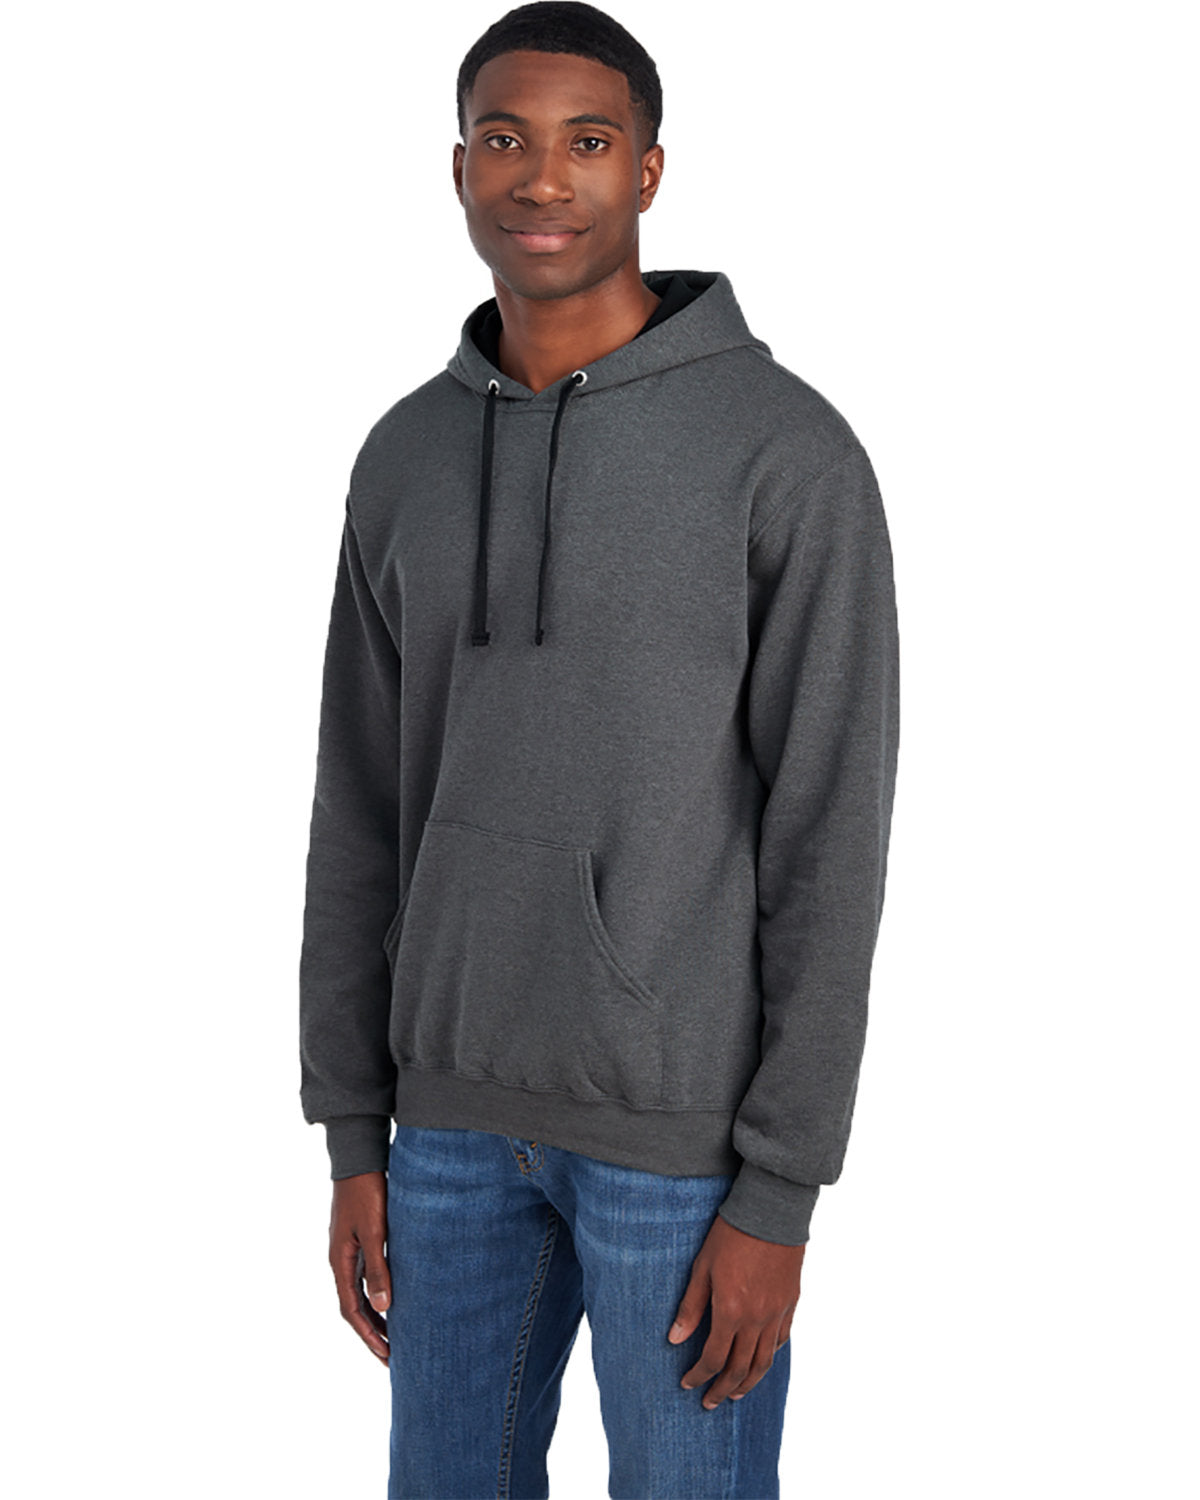 SF76R-Fruit of the Loom-CHARCOAL HEATHER